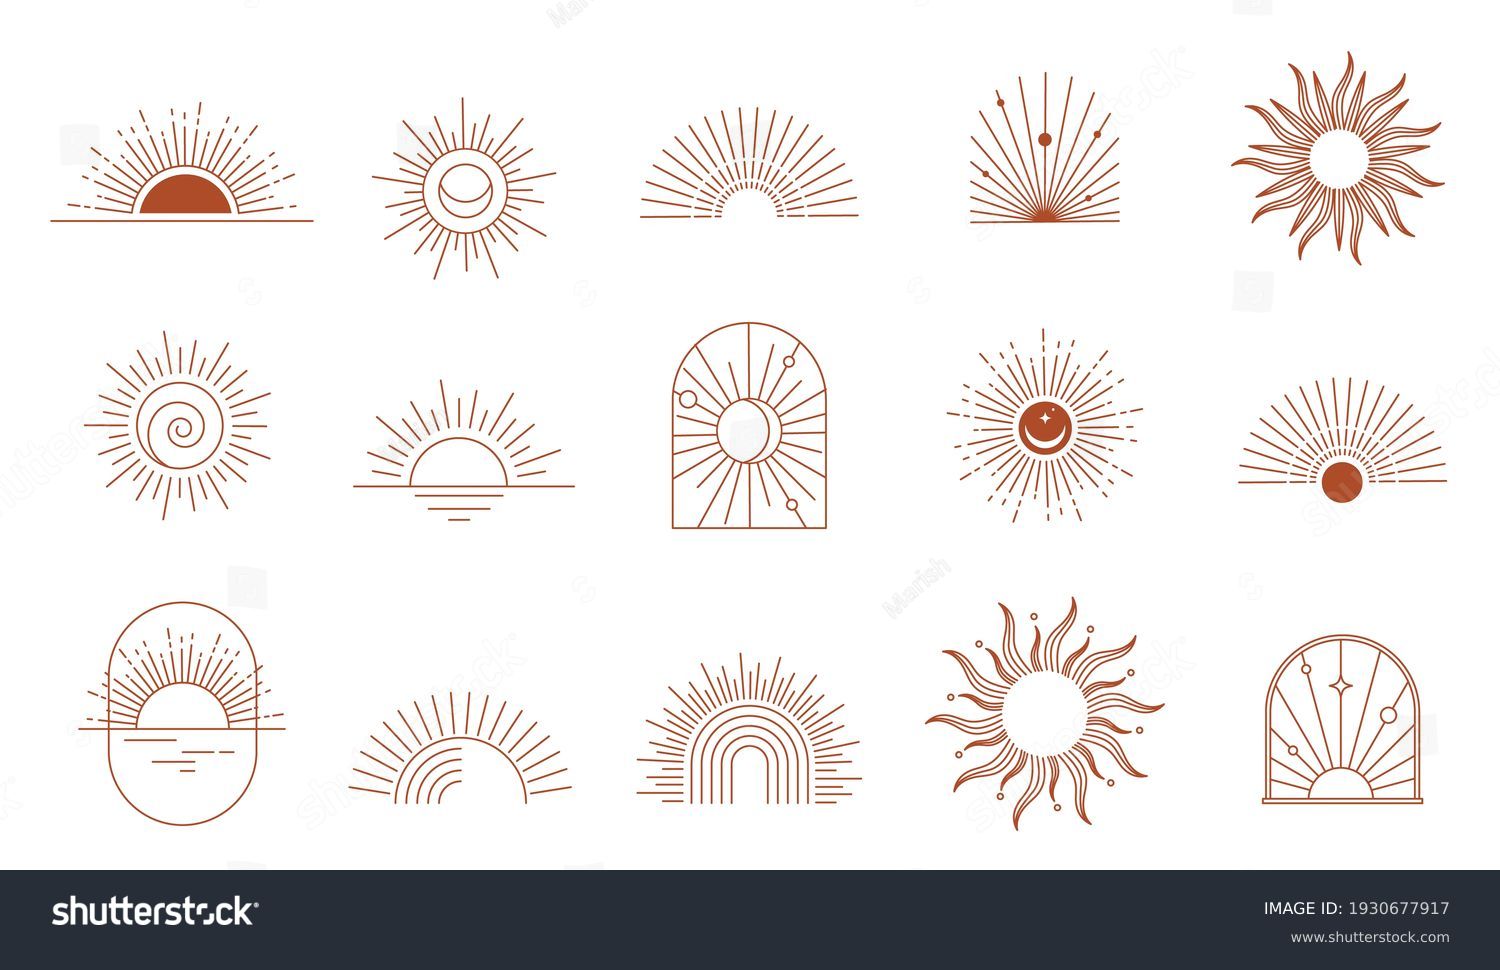 Bohemian linear logos, icons and symbols, sun, arc, window design templates, geometric abstract design elements for decoration.  #1930677917